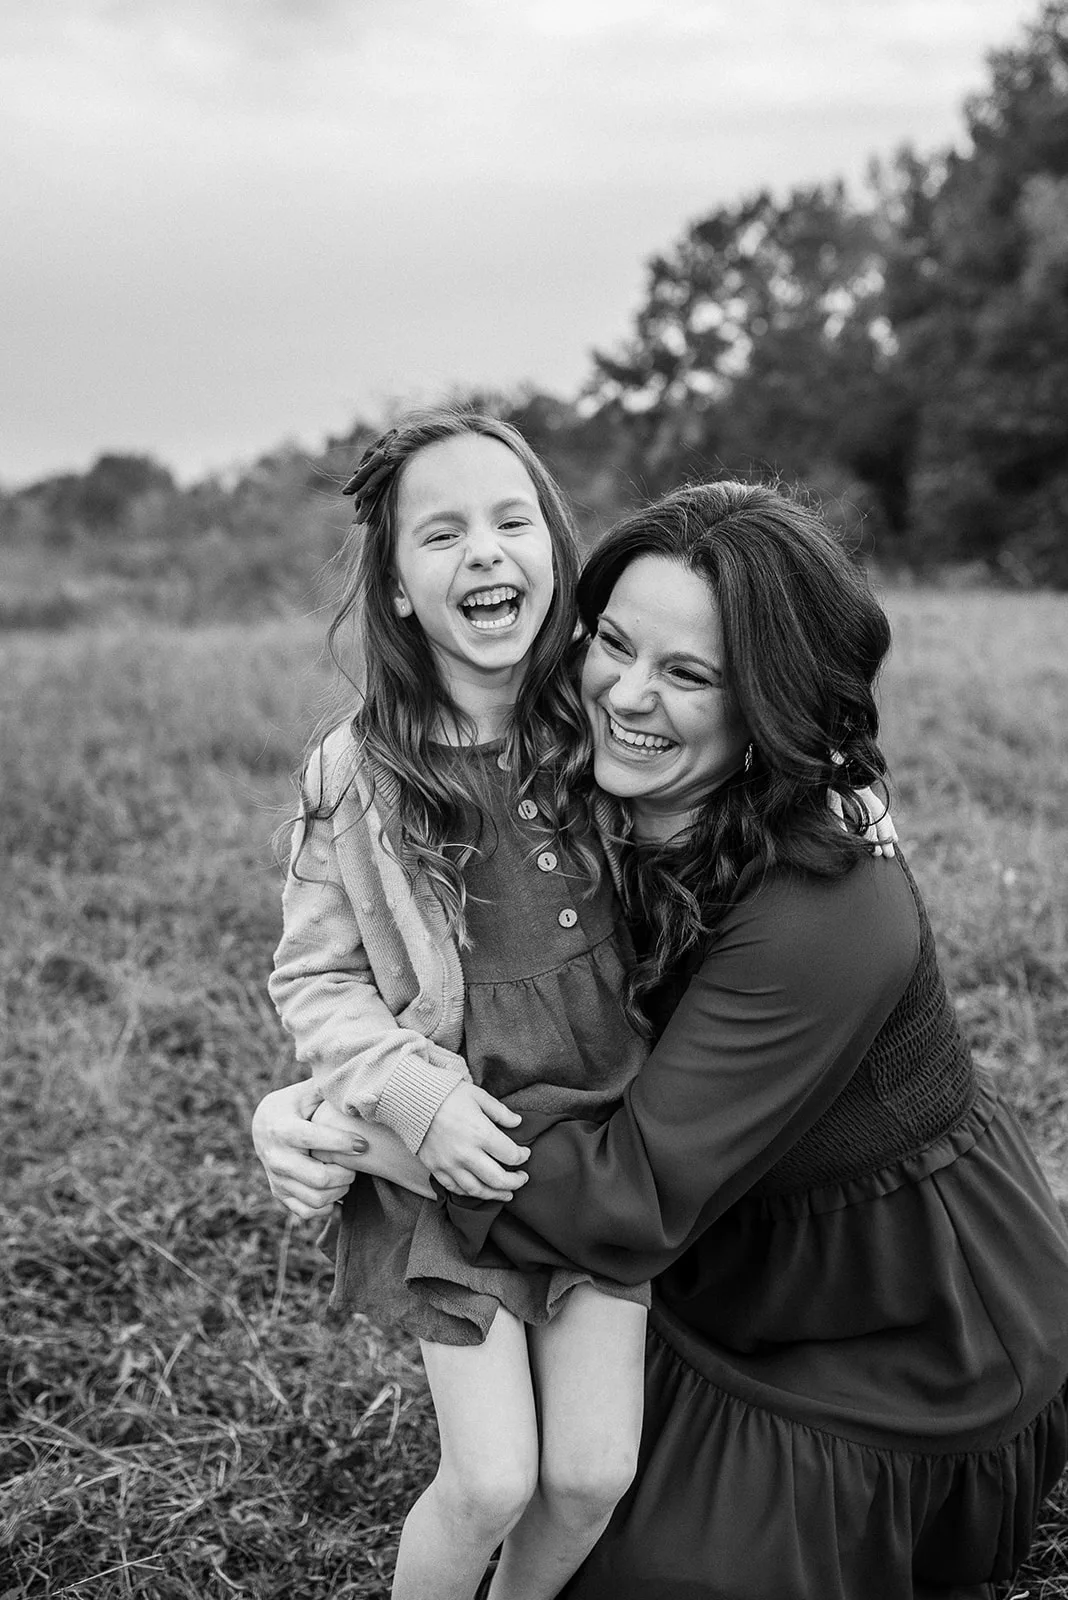 A mother and daughter laugh while hugging in a park field in black and white after visiting Houston Pediatric Dentistry